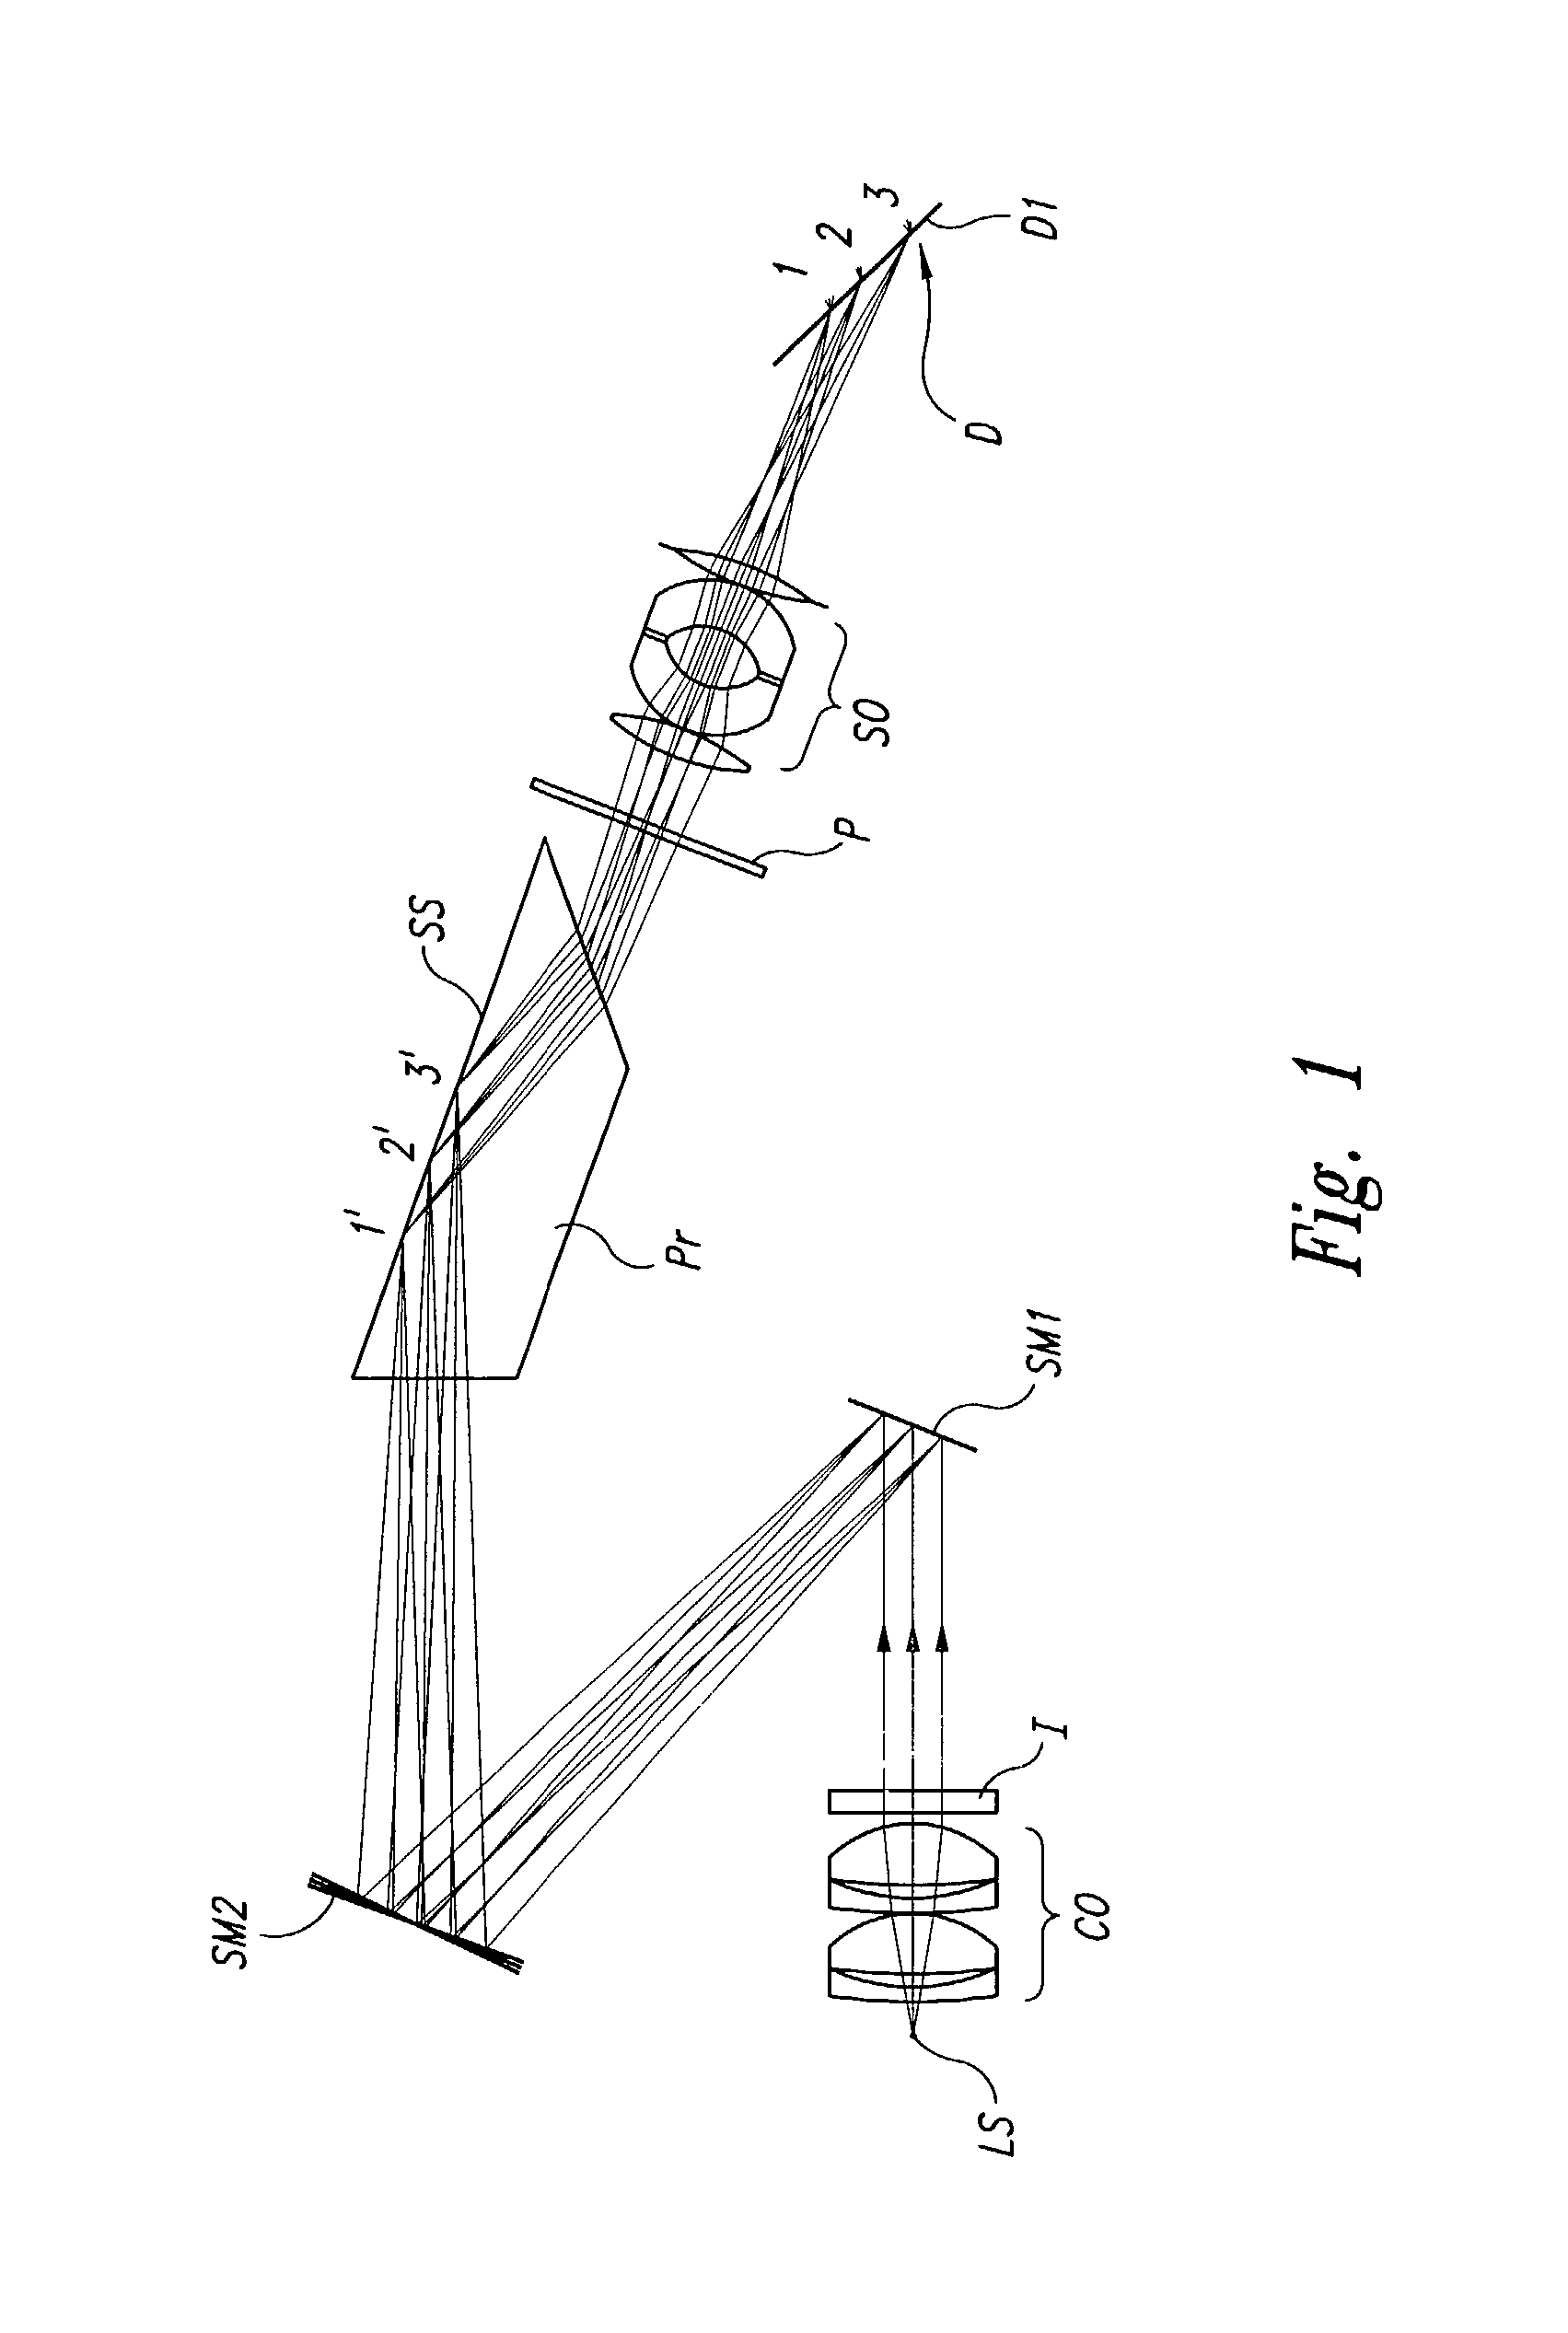 Analytical method and apparatus